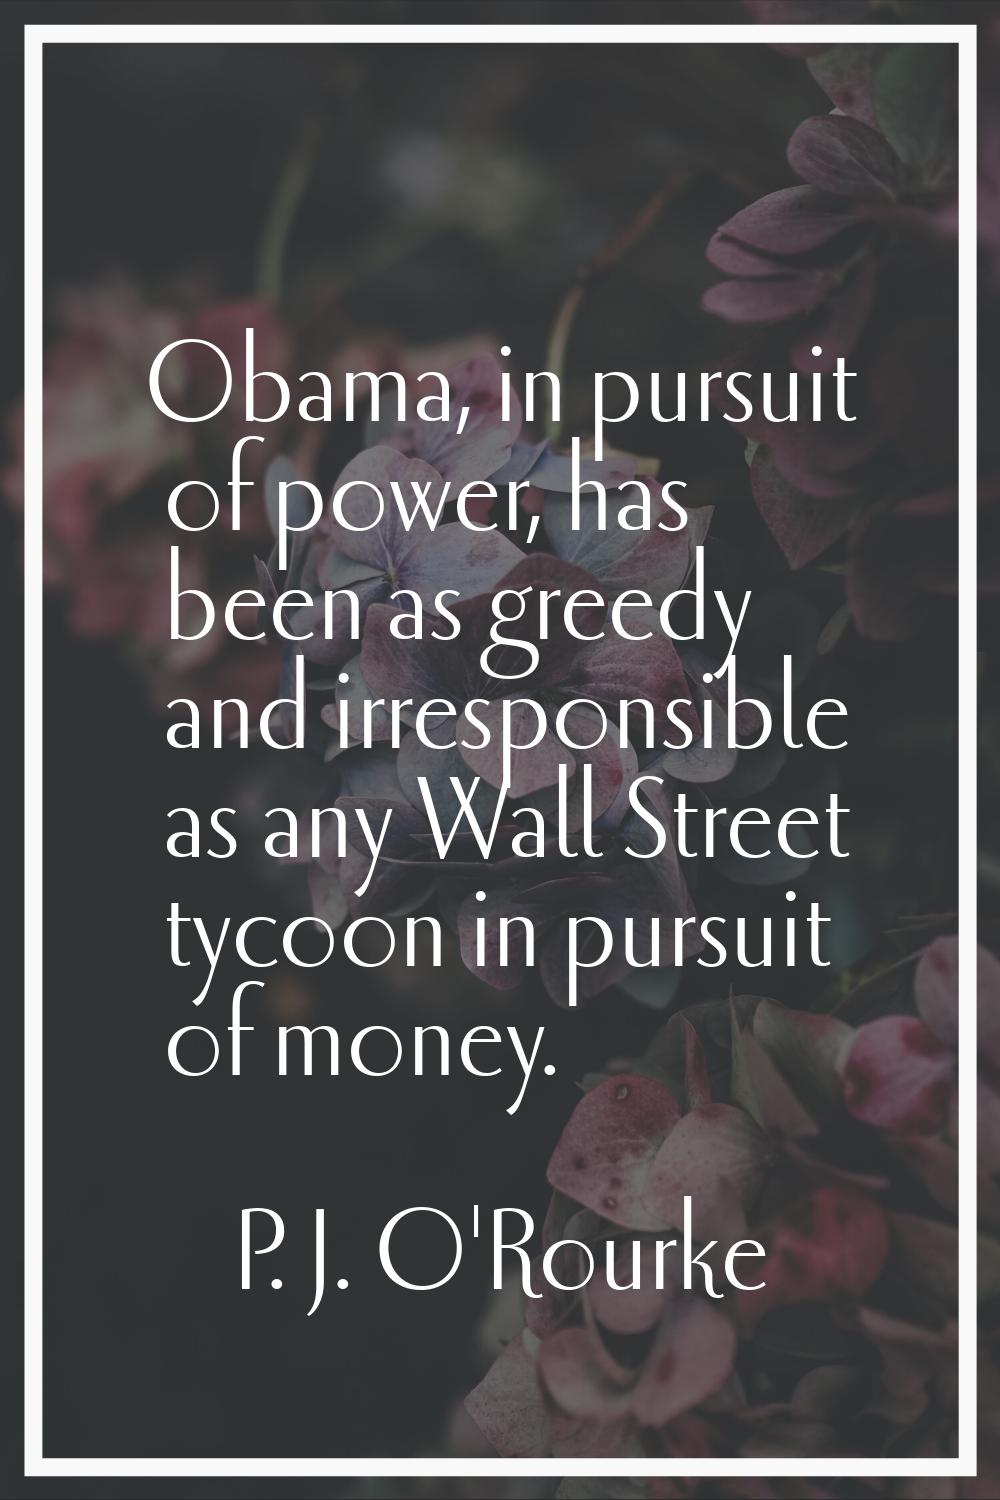 Obama, in pursuit of power, has been as greedy and irresponsible as any Wall Street tycoon in pursu